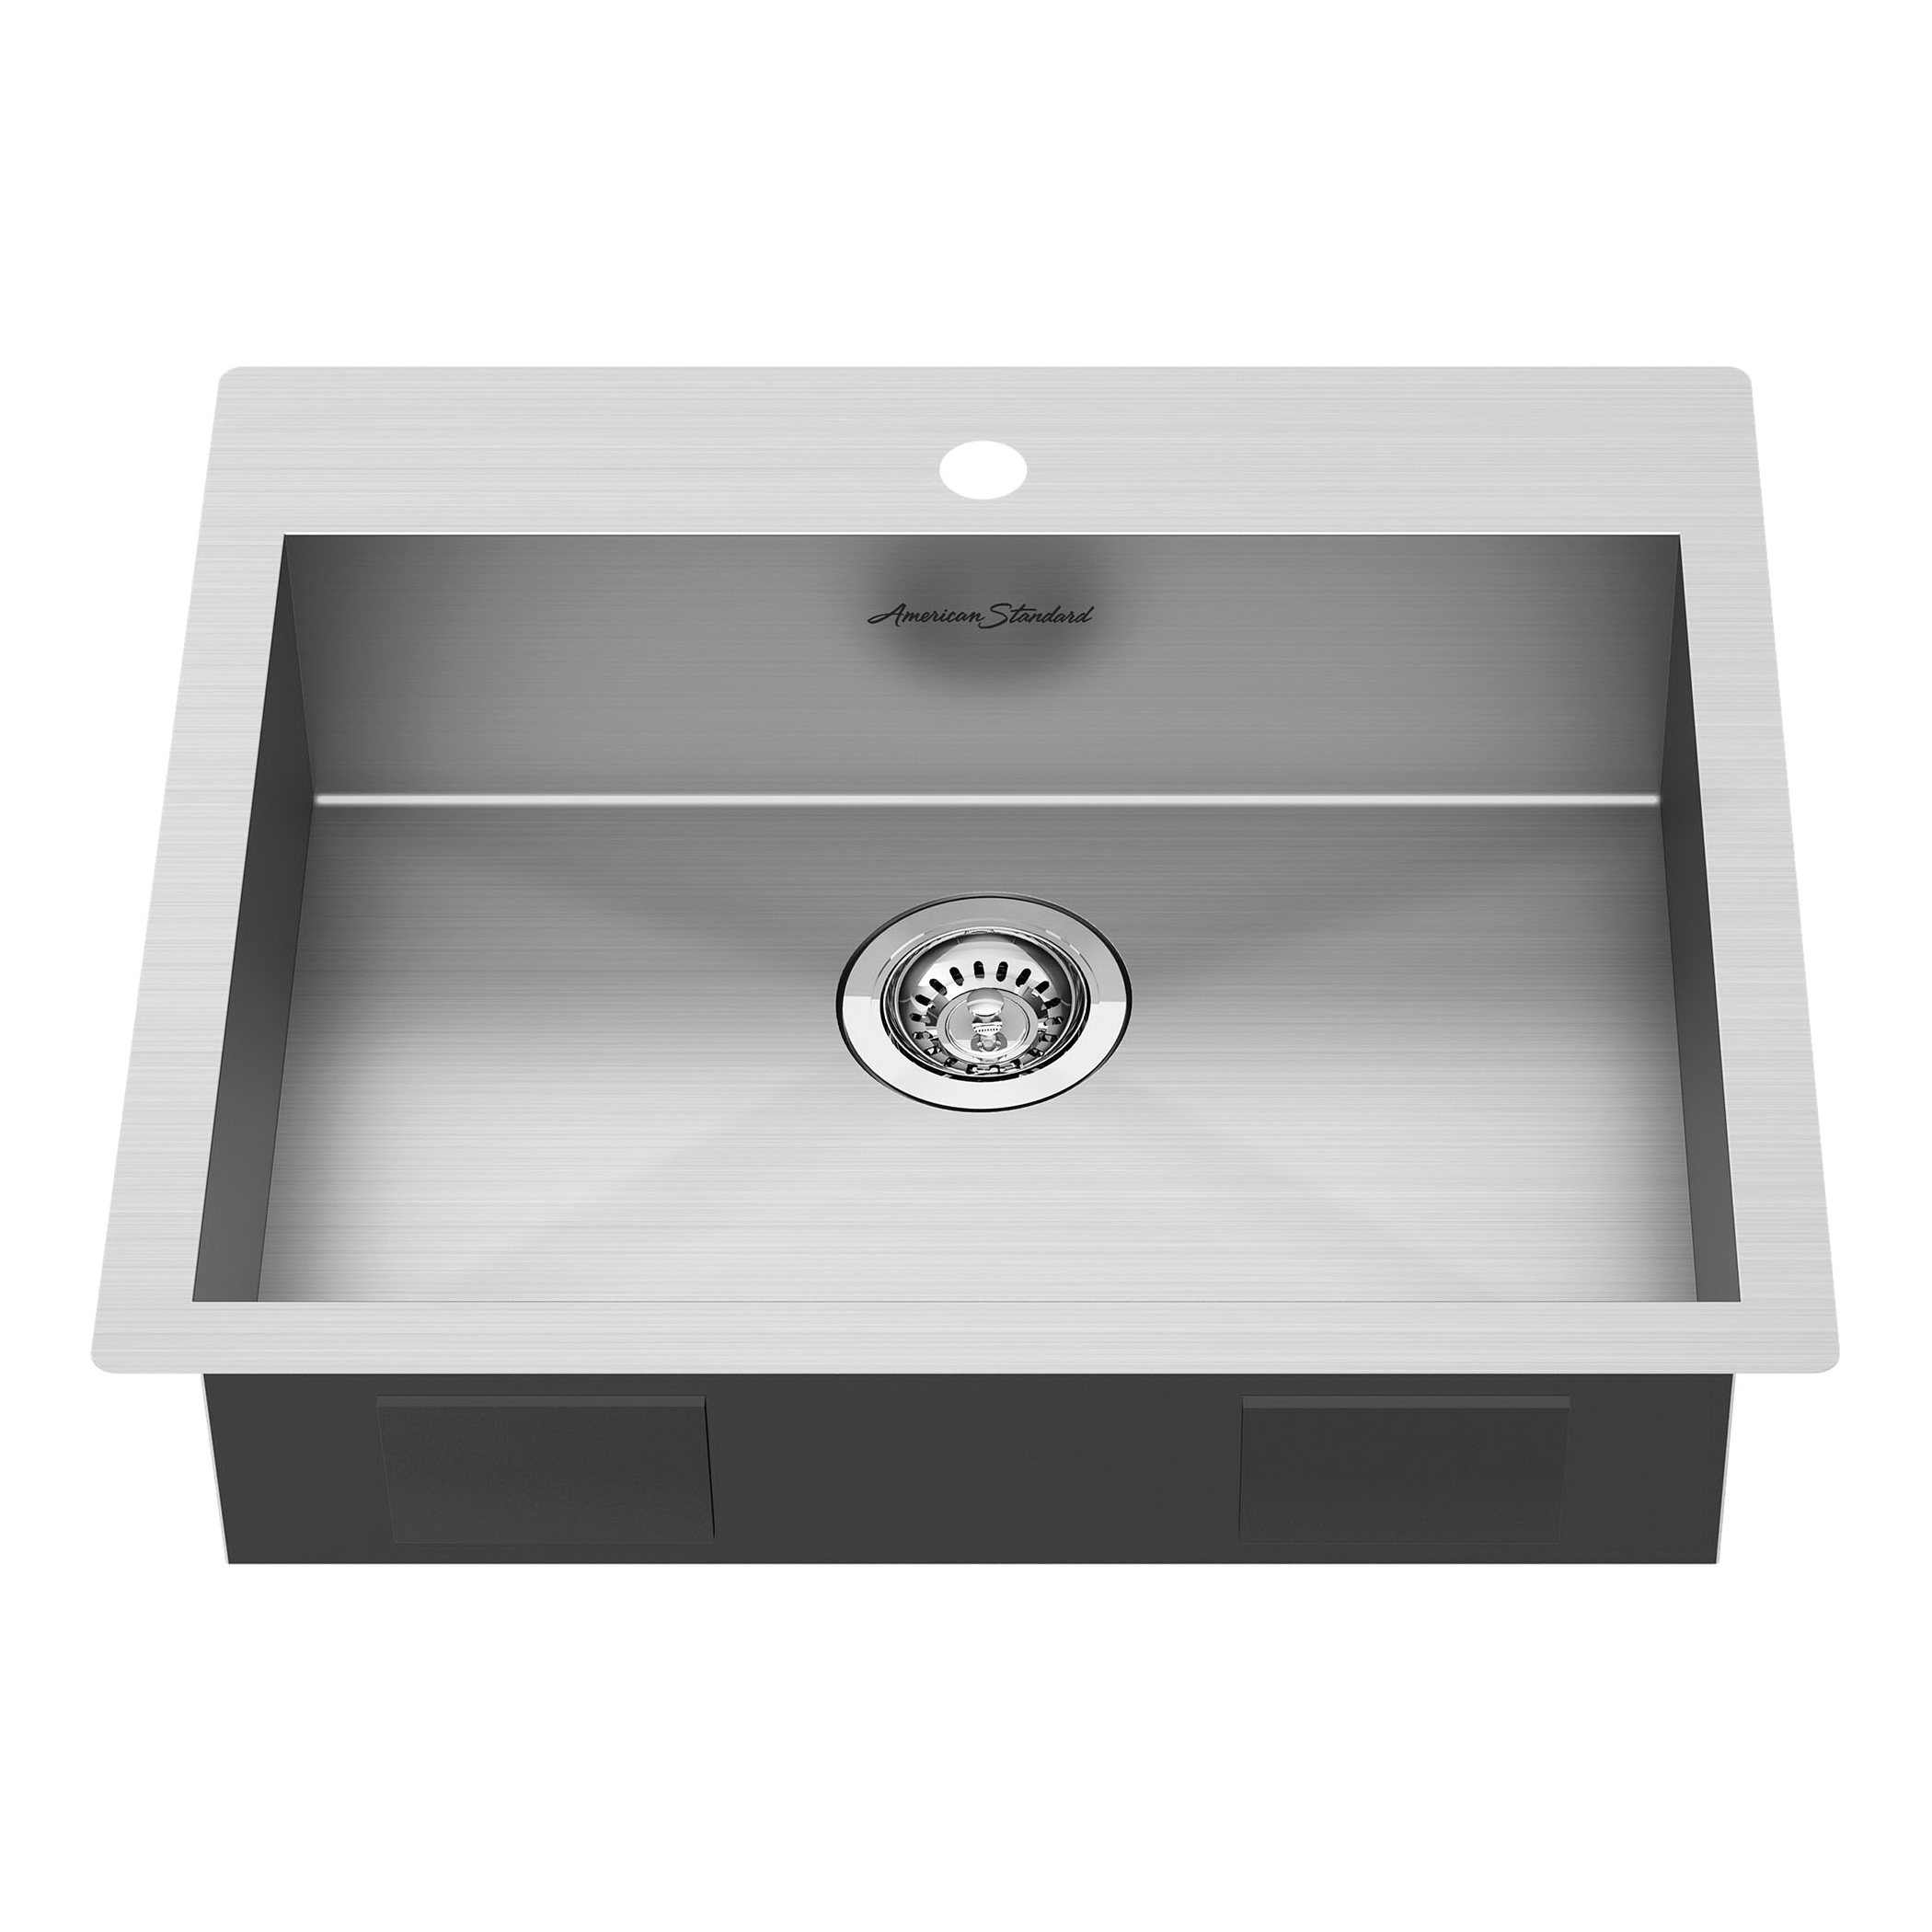 American Standard 18SB6252211.075 Edgewater® Kitchen Sink, Rectangular Shape, 1 Faucet Hole, 22 in L x 25 in W x 6 in H, Top/Under Mount, Stainless Steel, Stainless Steel, Import